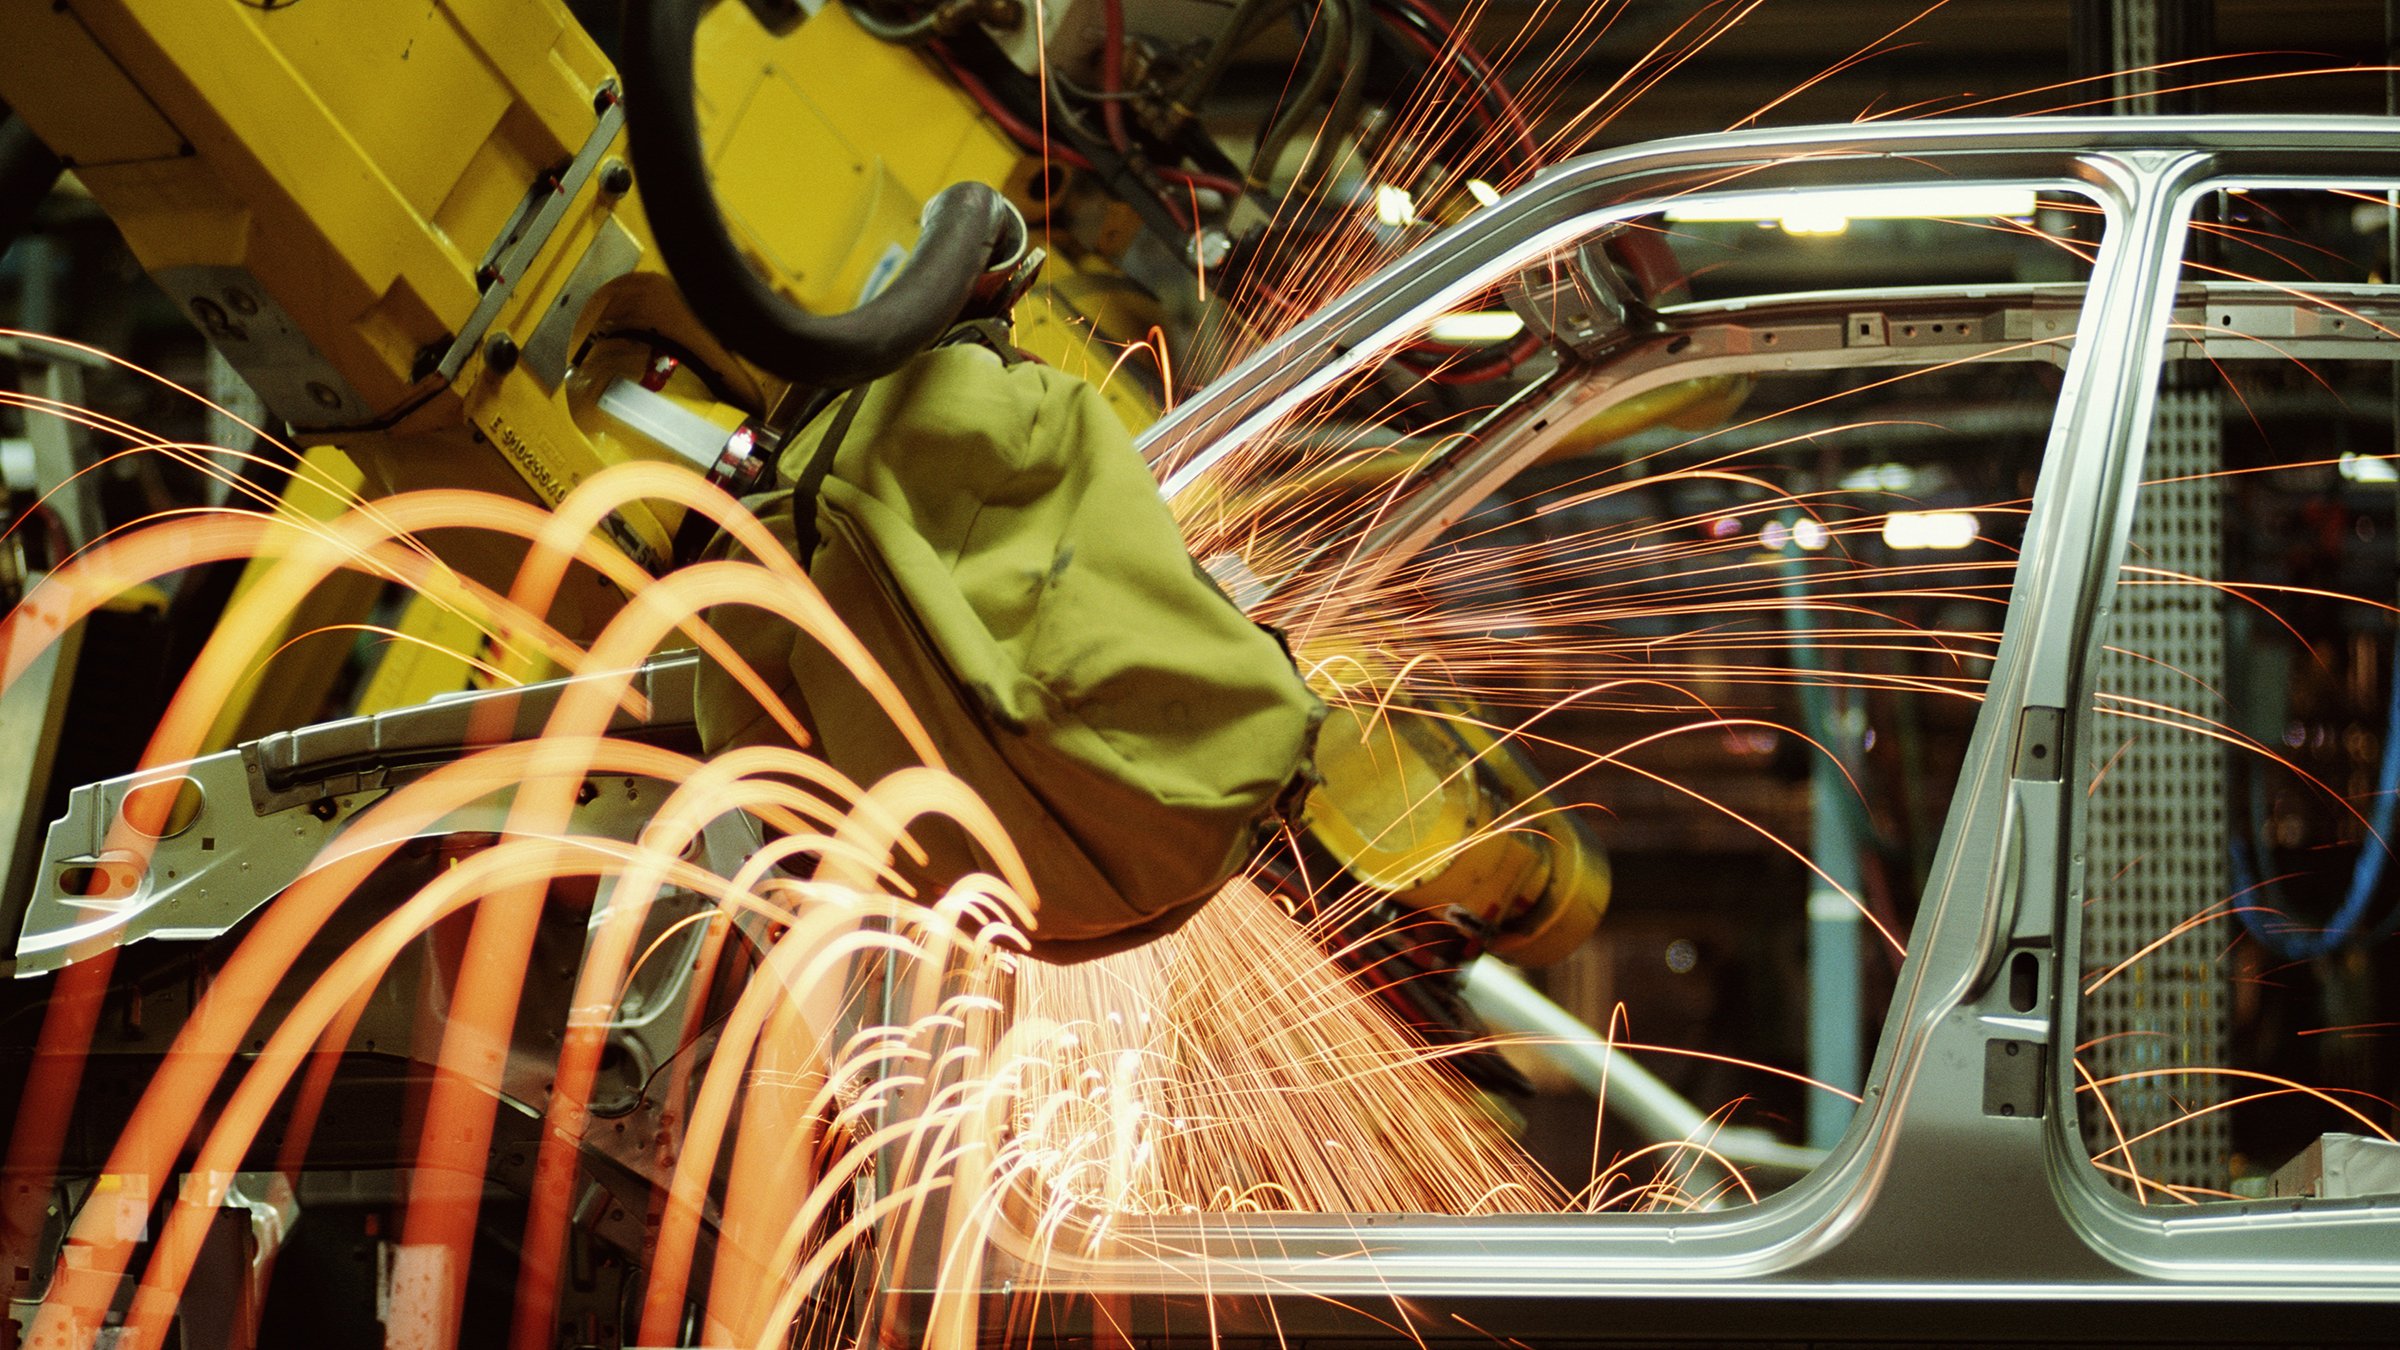 Sparks flying from a yellow robotic welding arm in an automotive factory